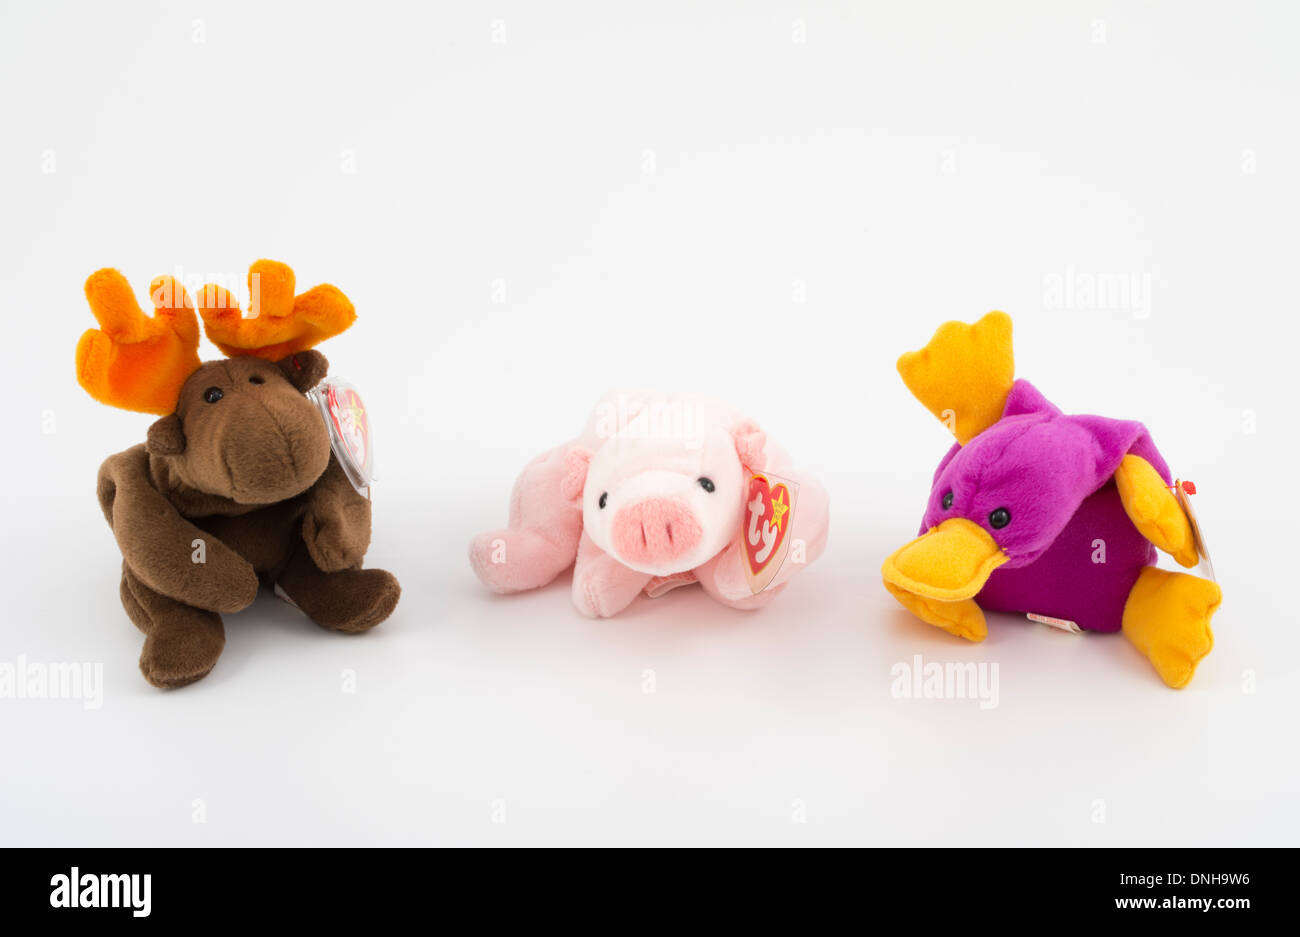 first generation 1993 Beanie Babies - Chocolate the Moose, Squealer the Pig, Patti the Platypus by Ty Warner Inc. Stock Photo